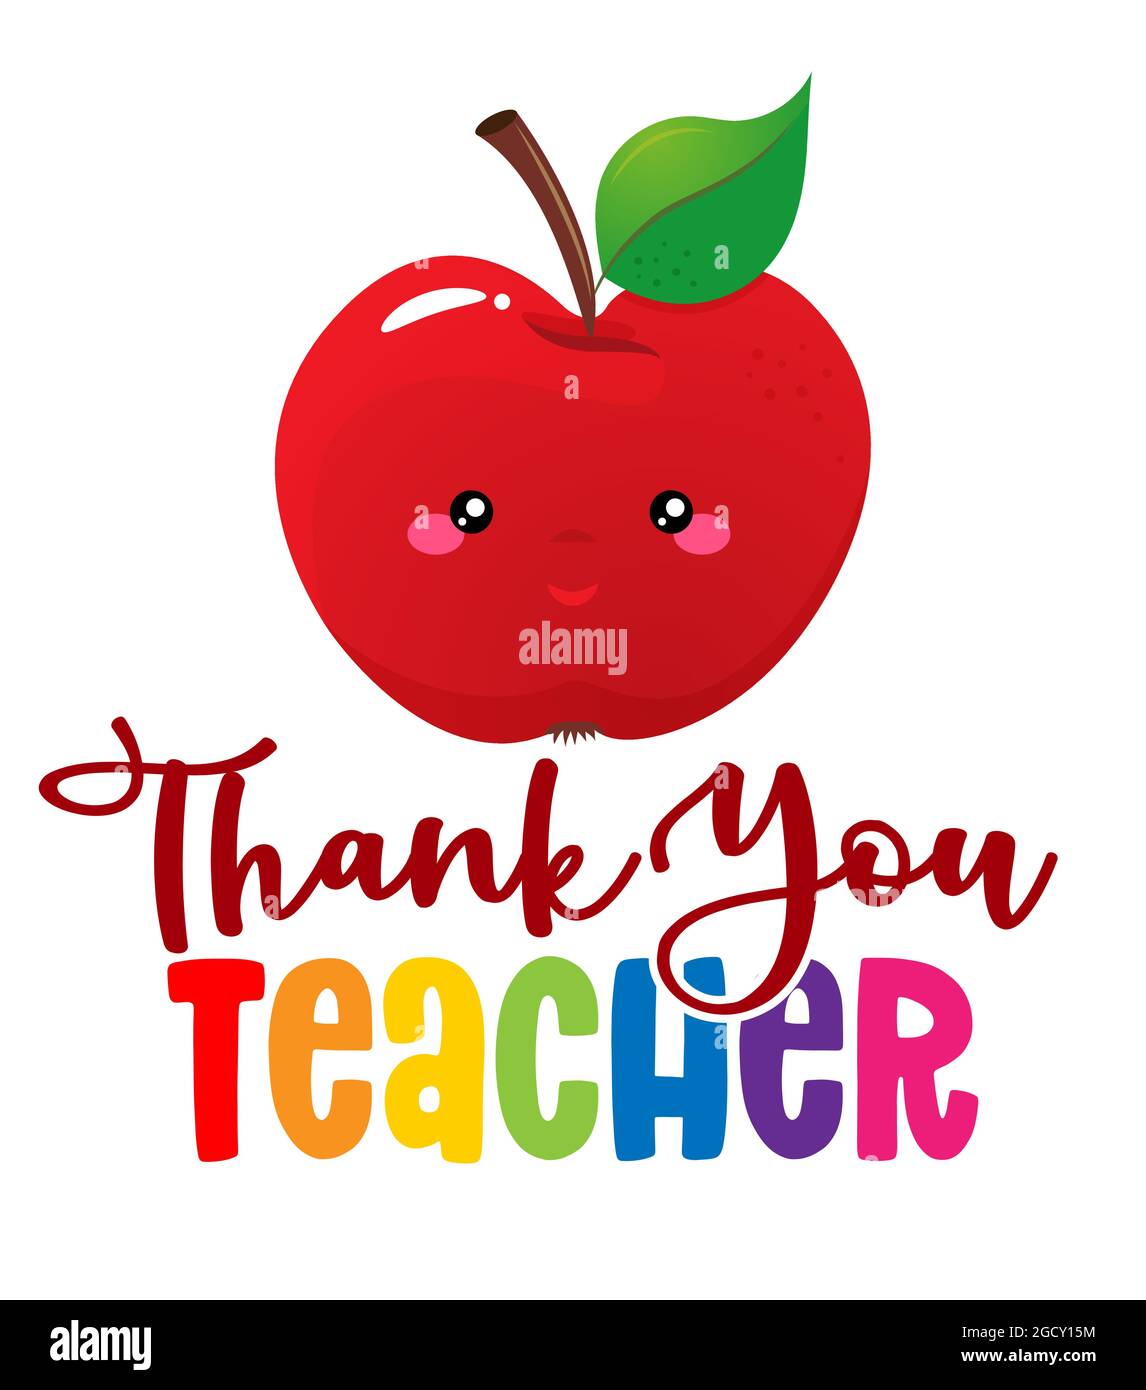 Thank you teacher - colorful calligraphy design. Thank you Gift card for Teacher's Day. Vector illustration on white background with red apple and pen Stock Vector